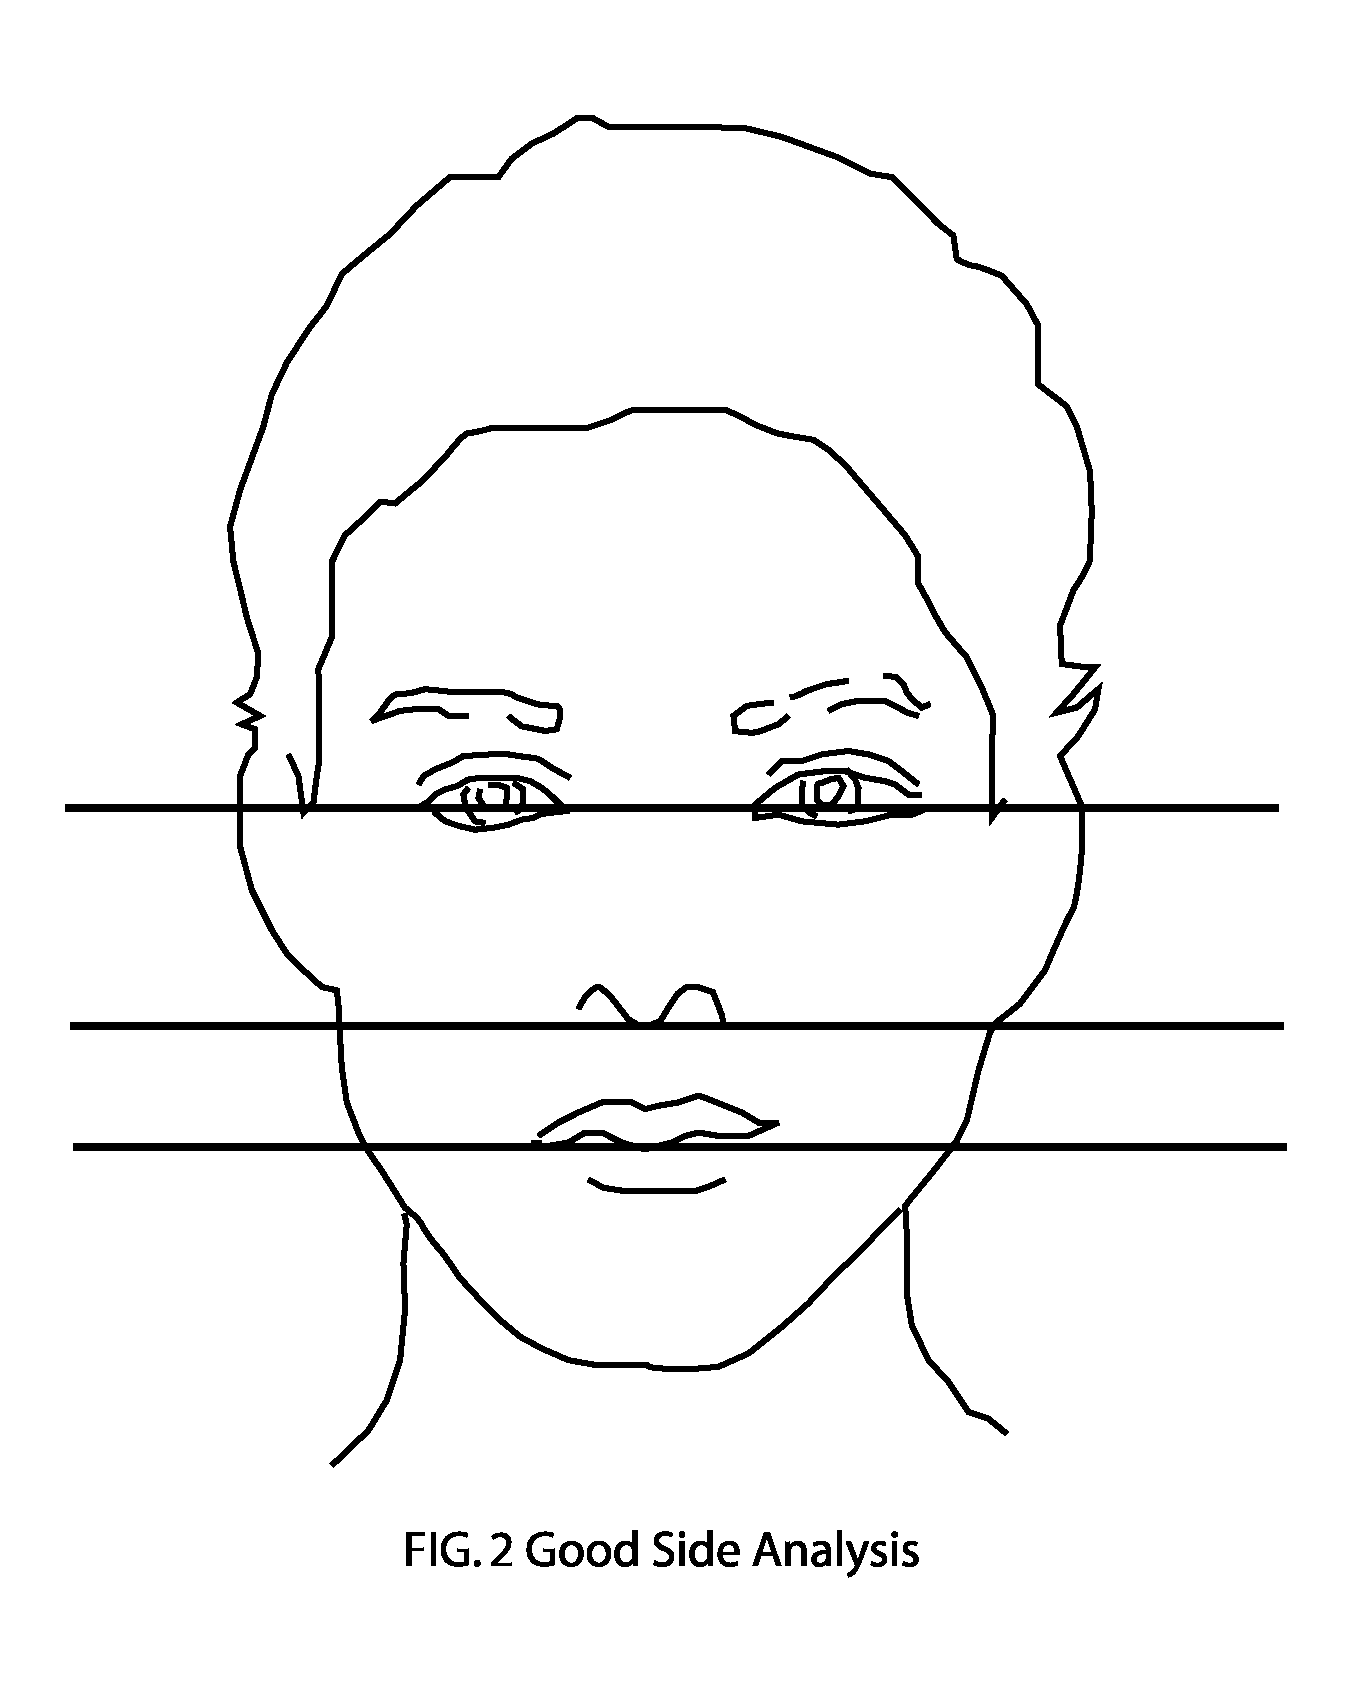 Methods Of Analyzing Human Facial Symmetry And Balance To Provide Beauty Advice